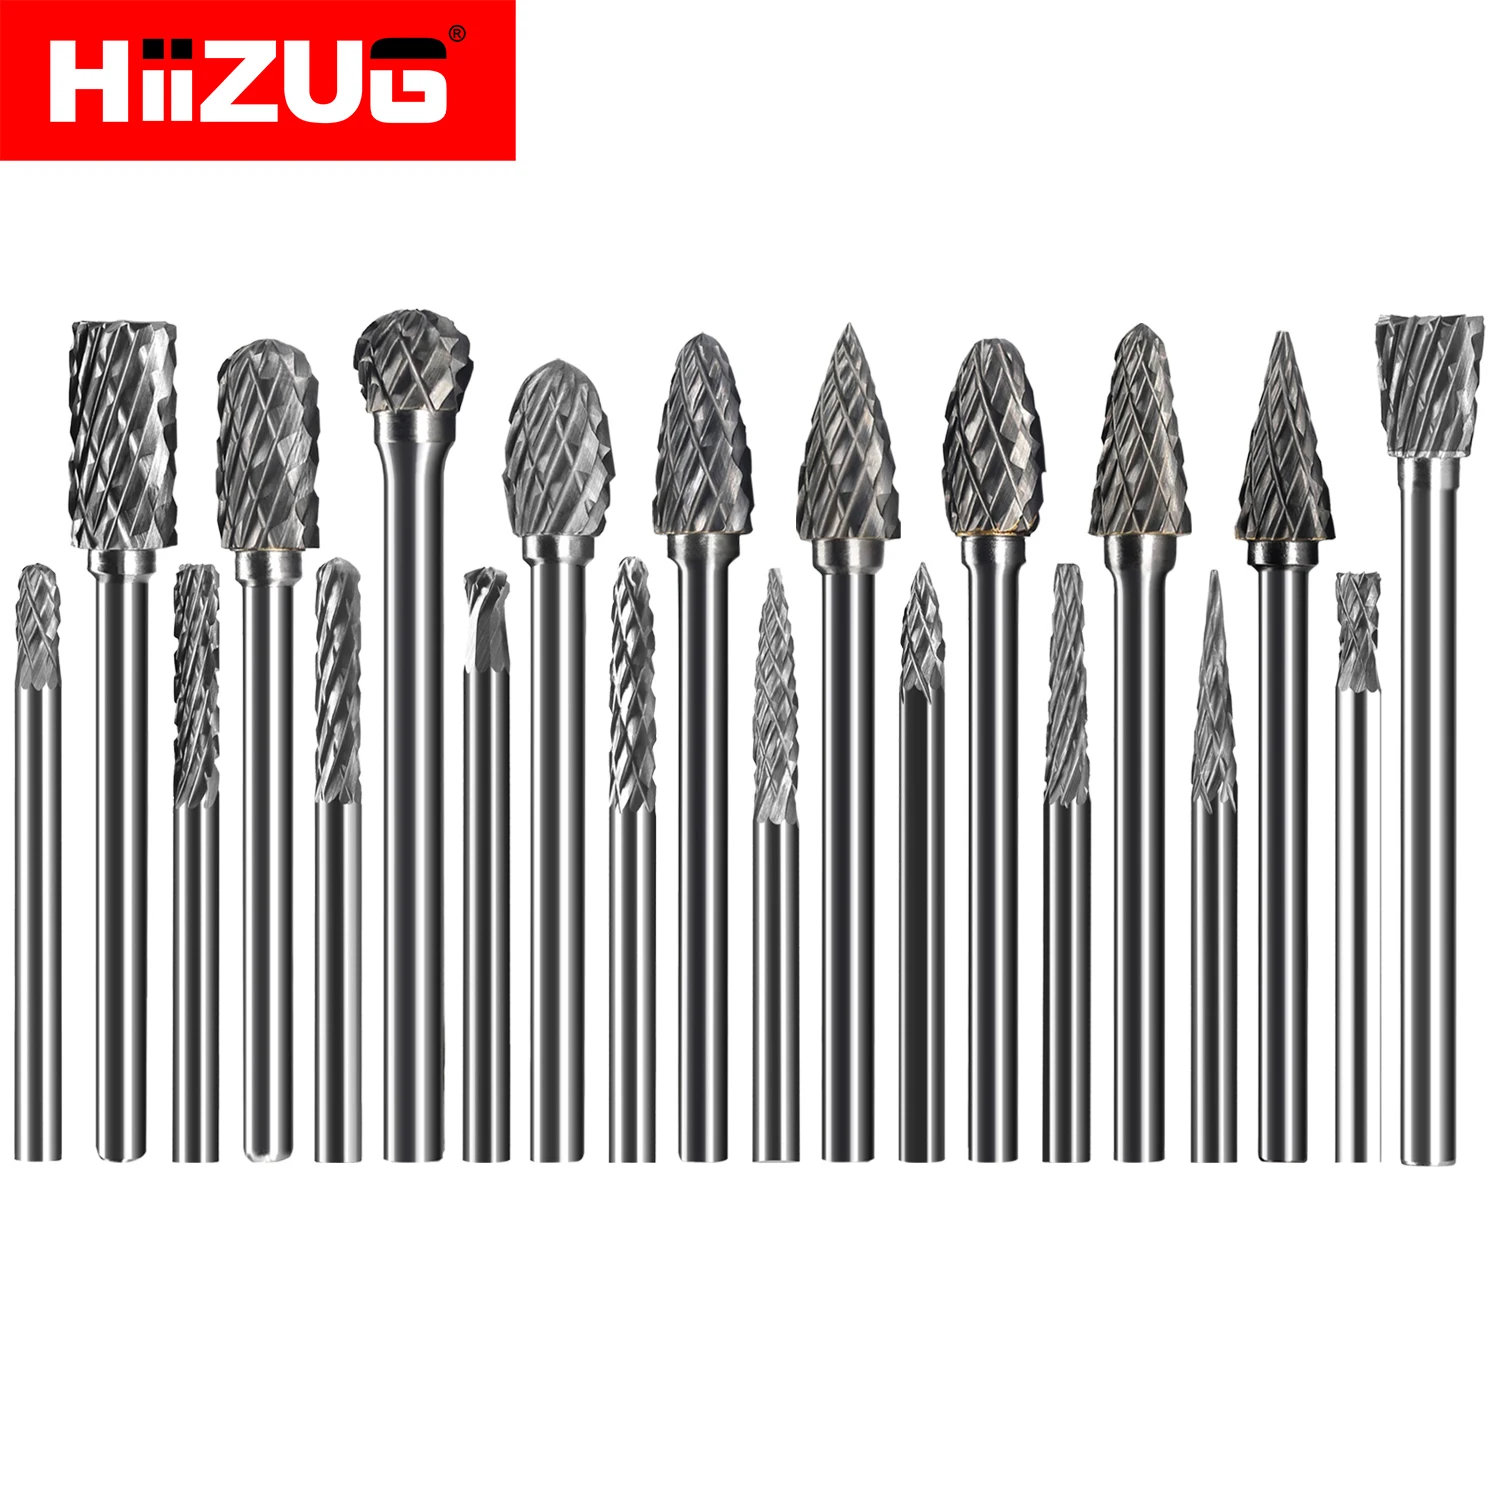 Carbide Die Drill Grinder Rotary Files Mini Burrs Double Cut for Demel Wood Metal Carving Engraving Drilling 1/8 inch Diameter 6mm drill grinder die carbide burr inverted rotary file 1 4 inch double cut for dremel rotary tools metal wood sn 4